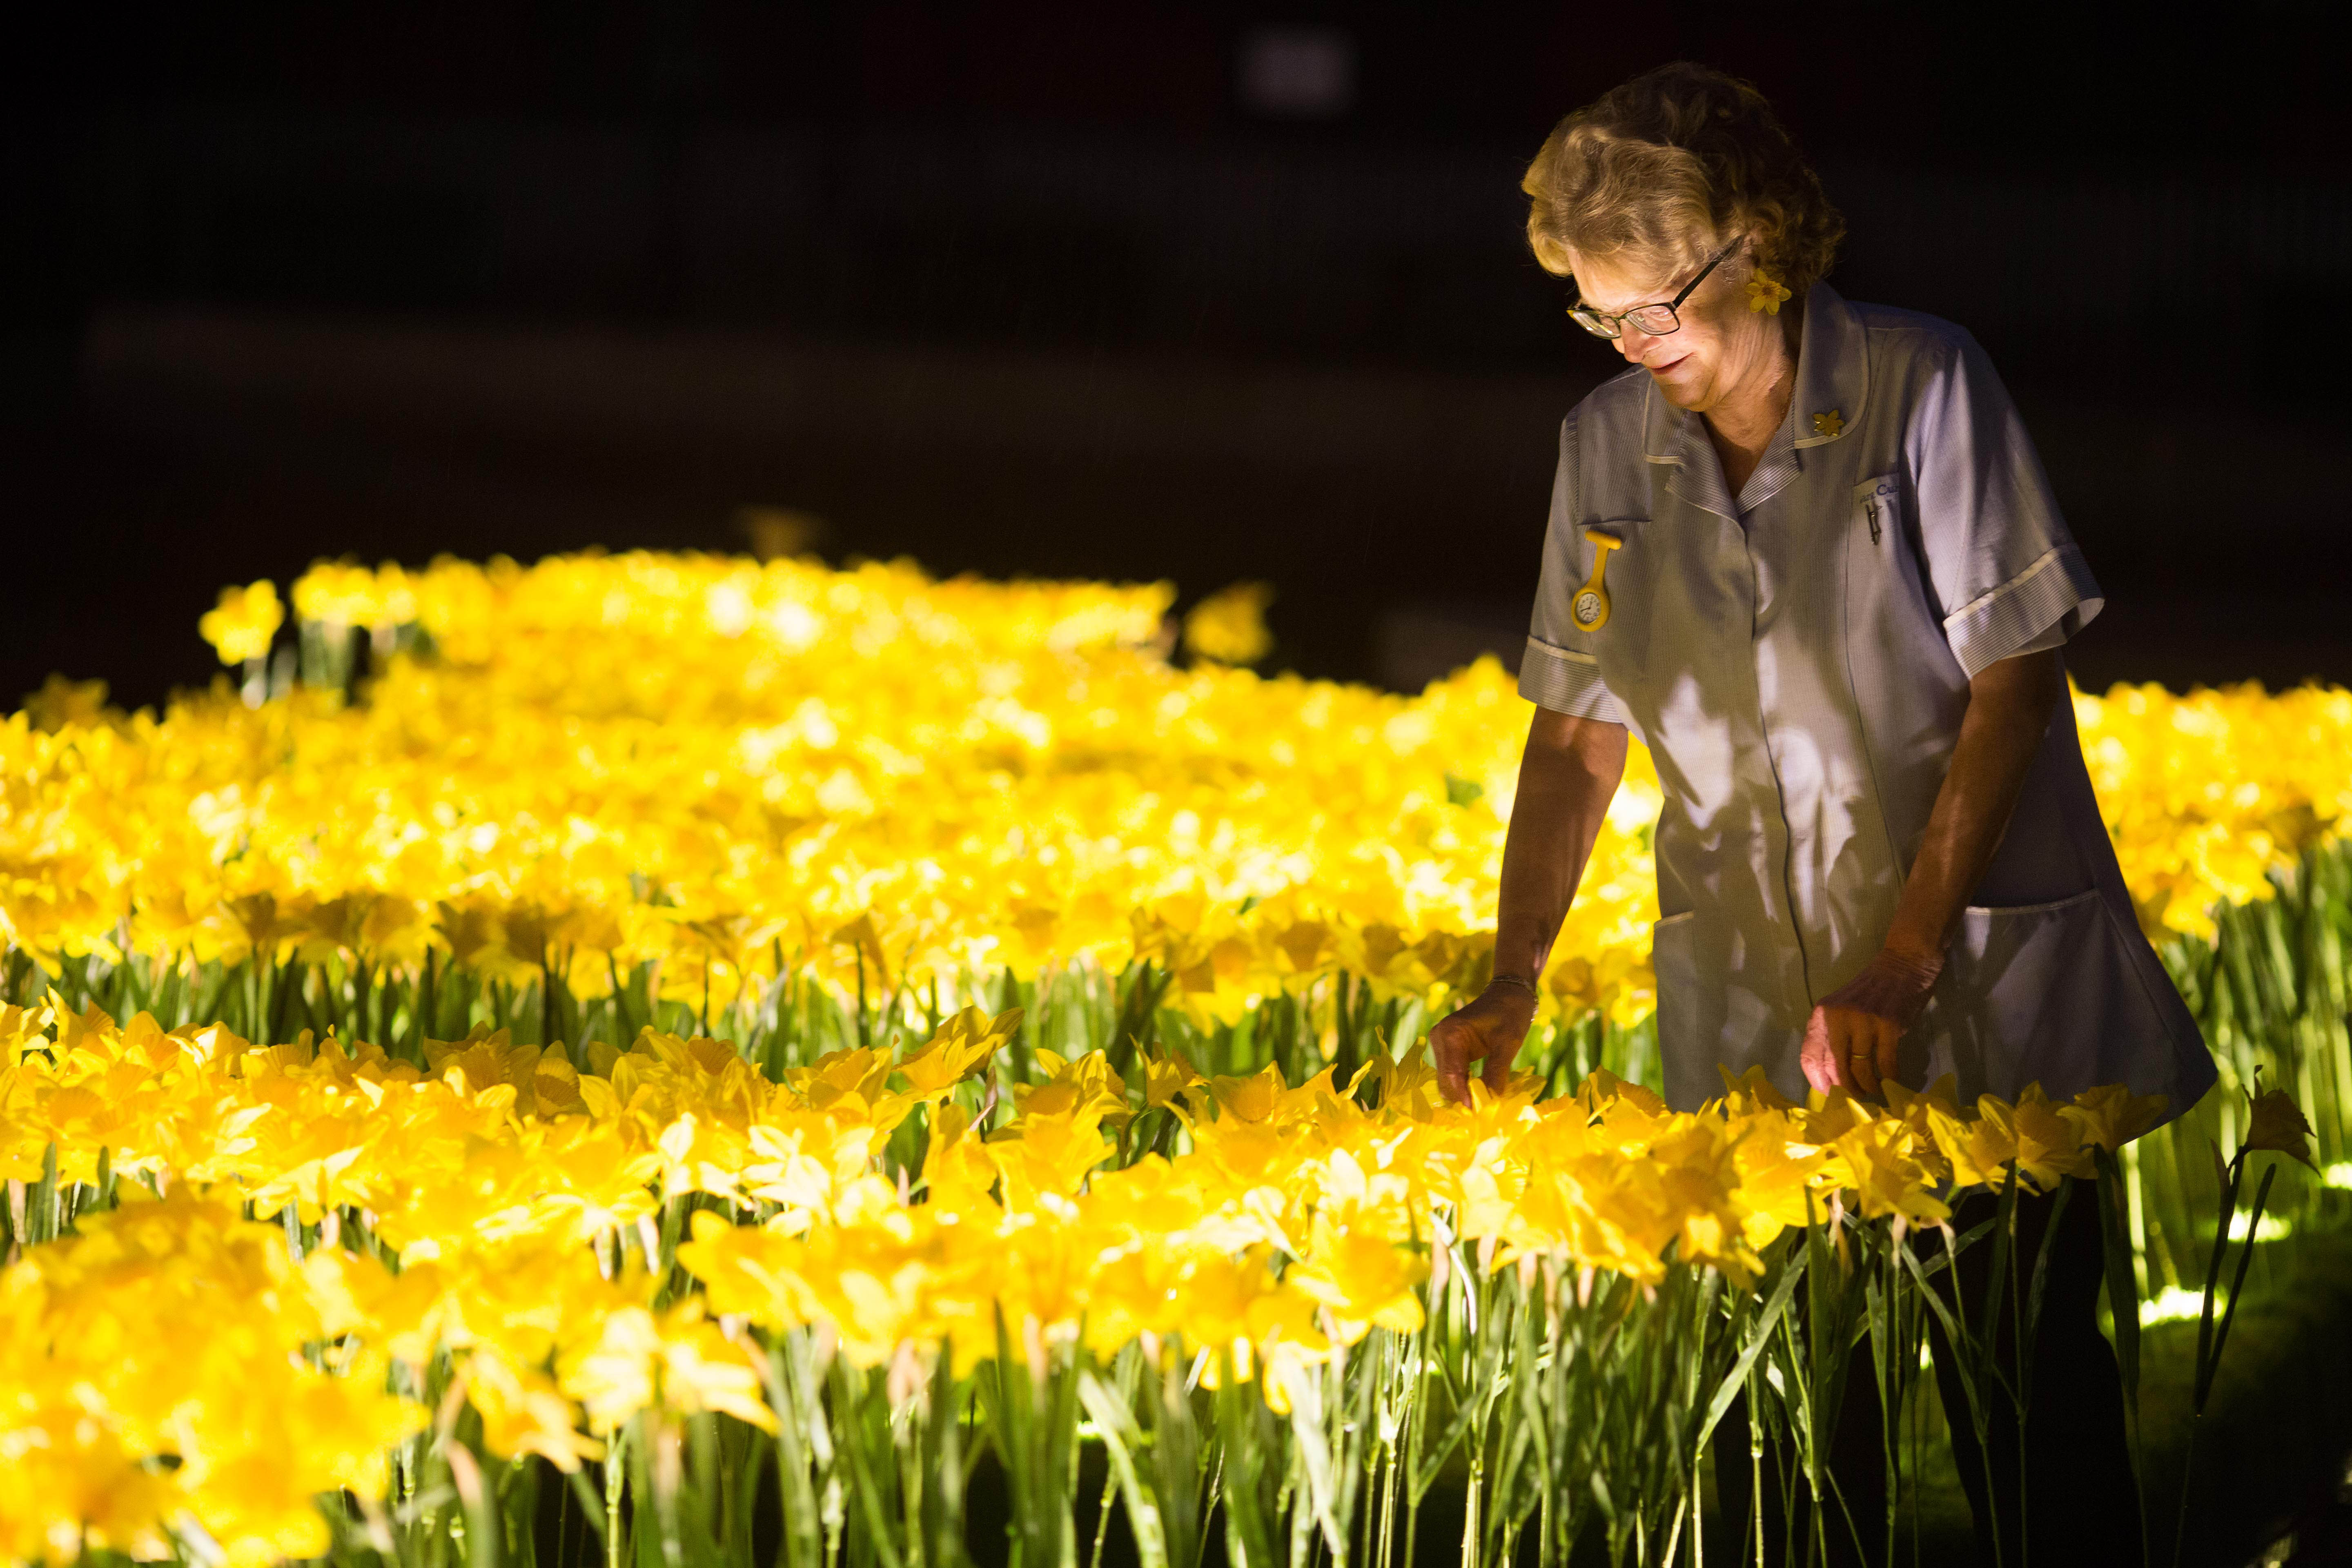 Charity Marie Curie Opens Immersive Art Installation 'Garden of Light' in London